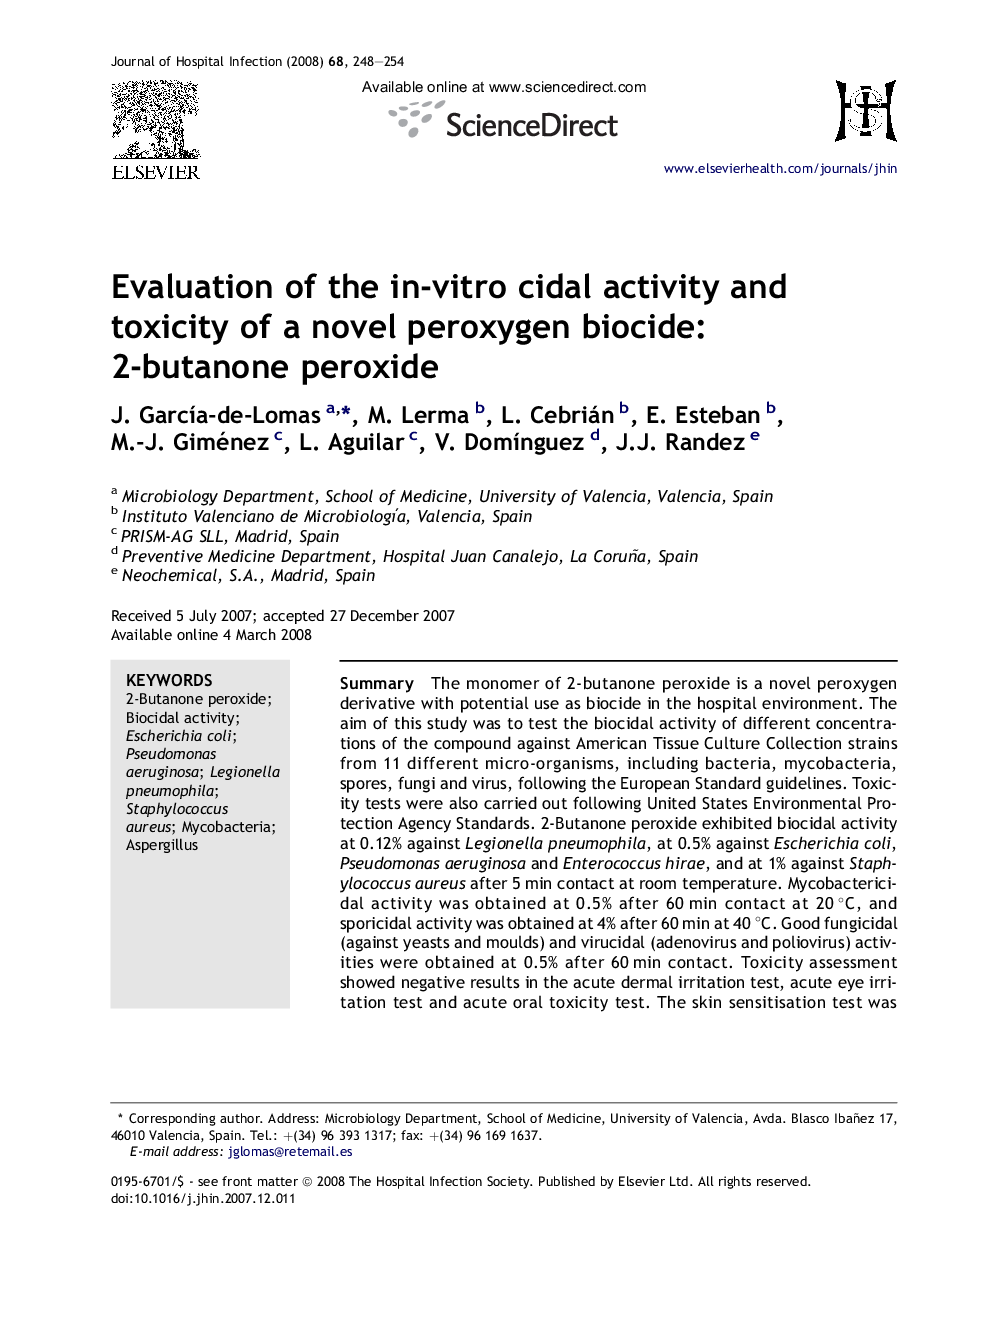 Evaluation of the in-vitro cidal activity and toxicity of a novel peroxygen biocide: 2-butanone peroxide